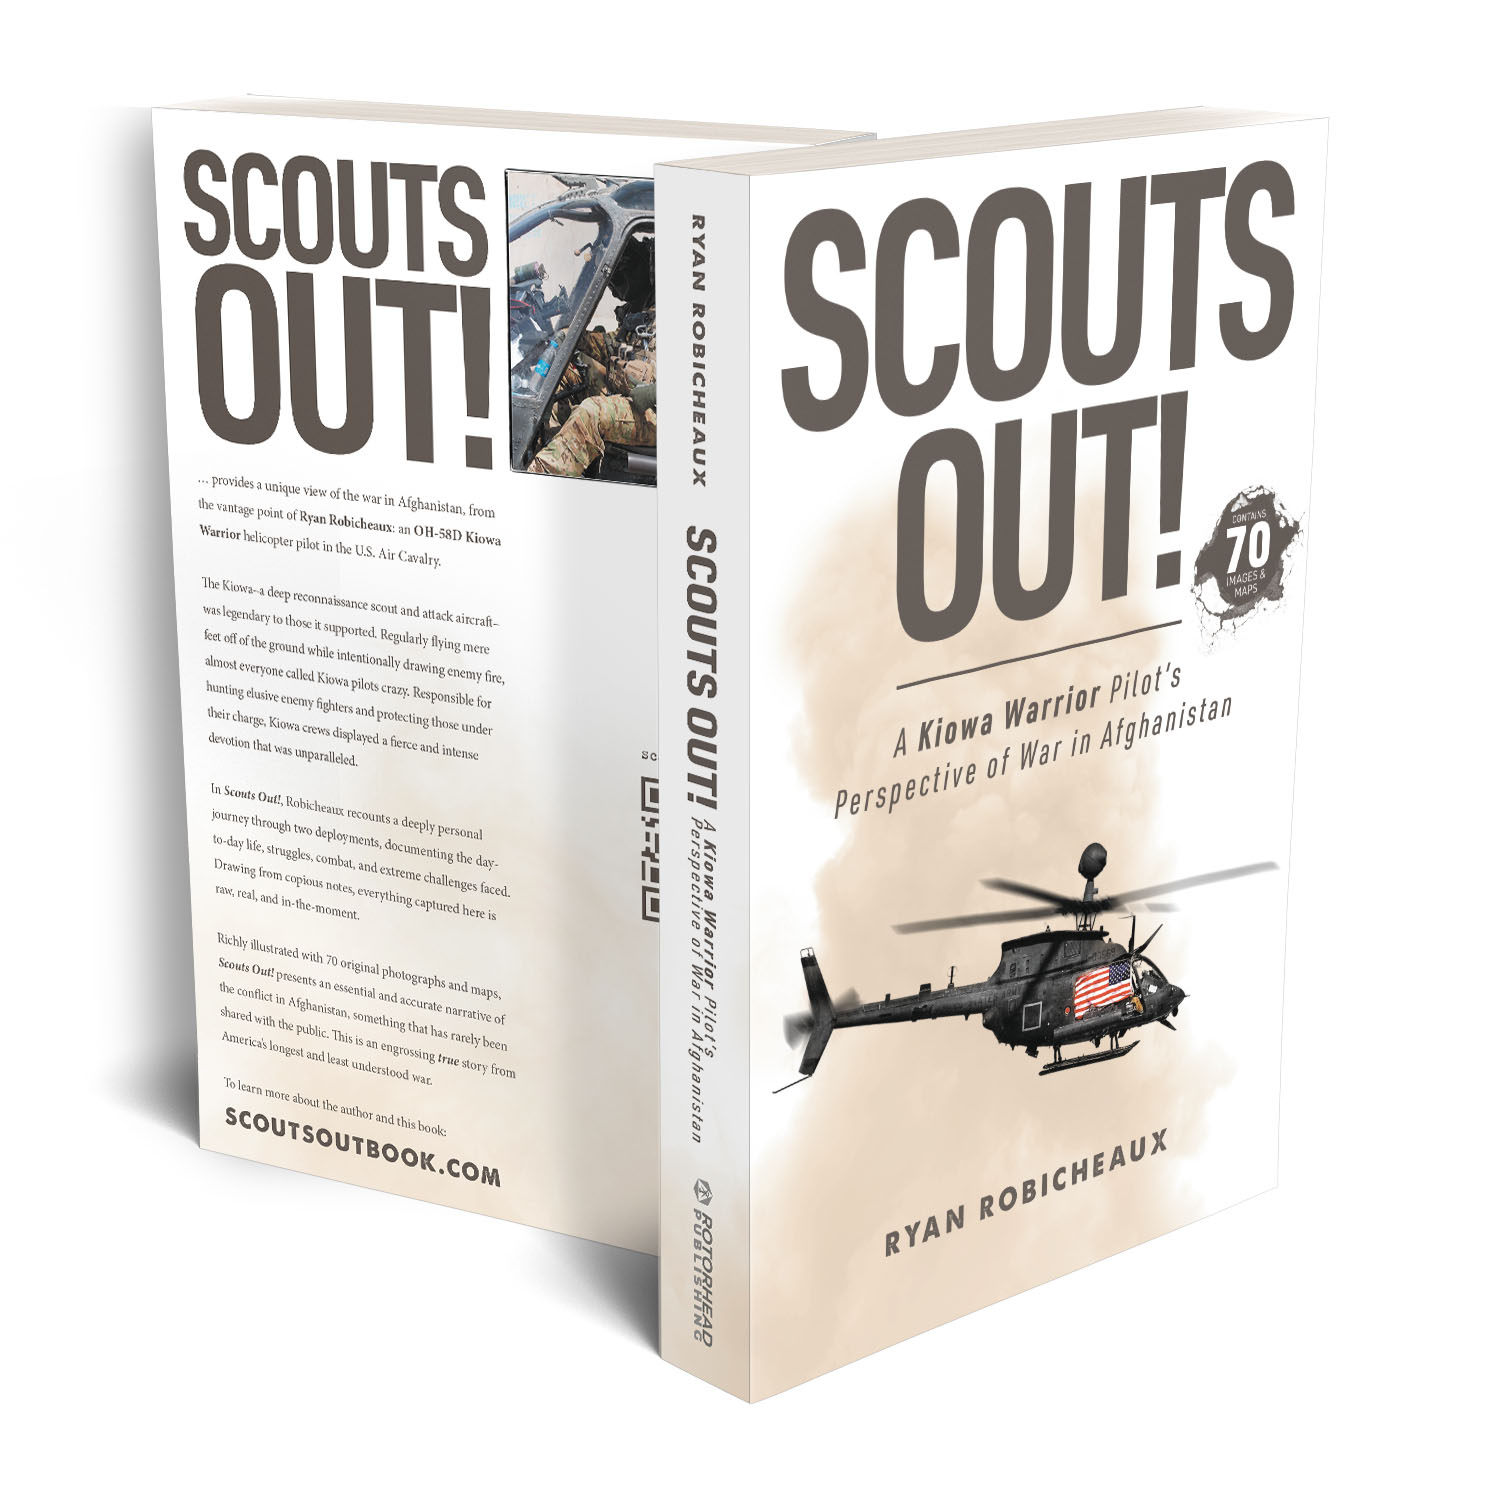 'Scouts Out!' is an immersive, first-hand memoir from the frontlines of the US war in Afghanistan. The author is Ryan Robicheaux. The book cover and interior were designed by Mark Thomas of coverness.com. To find out more about my book design services, please visit www.coverness.com